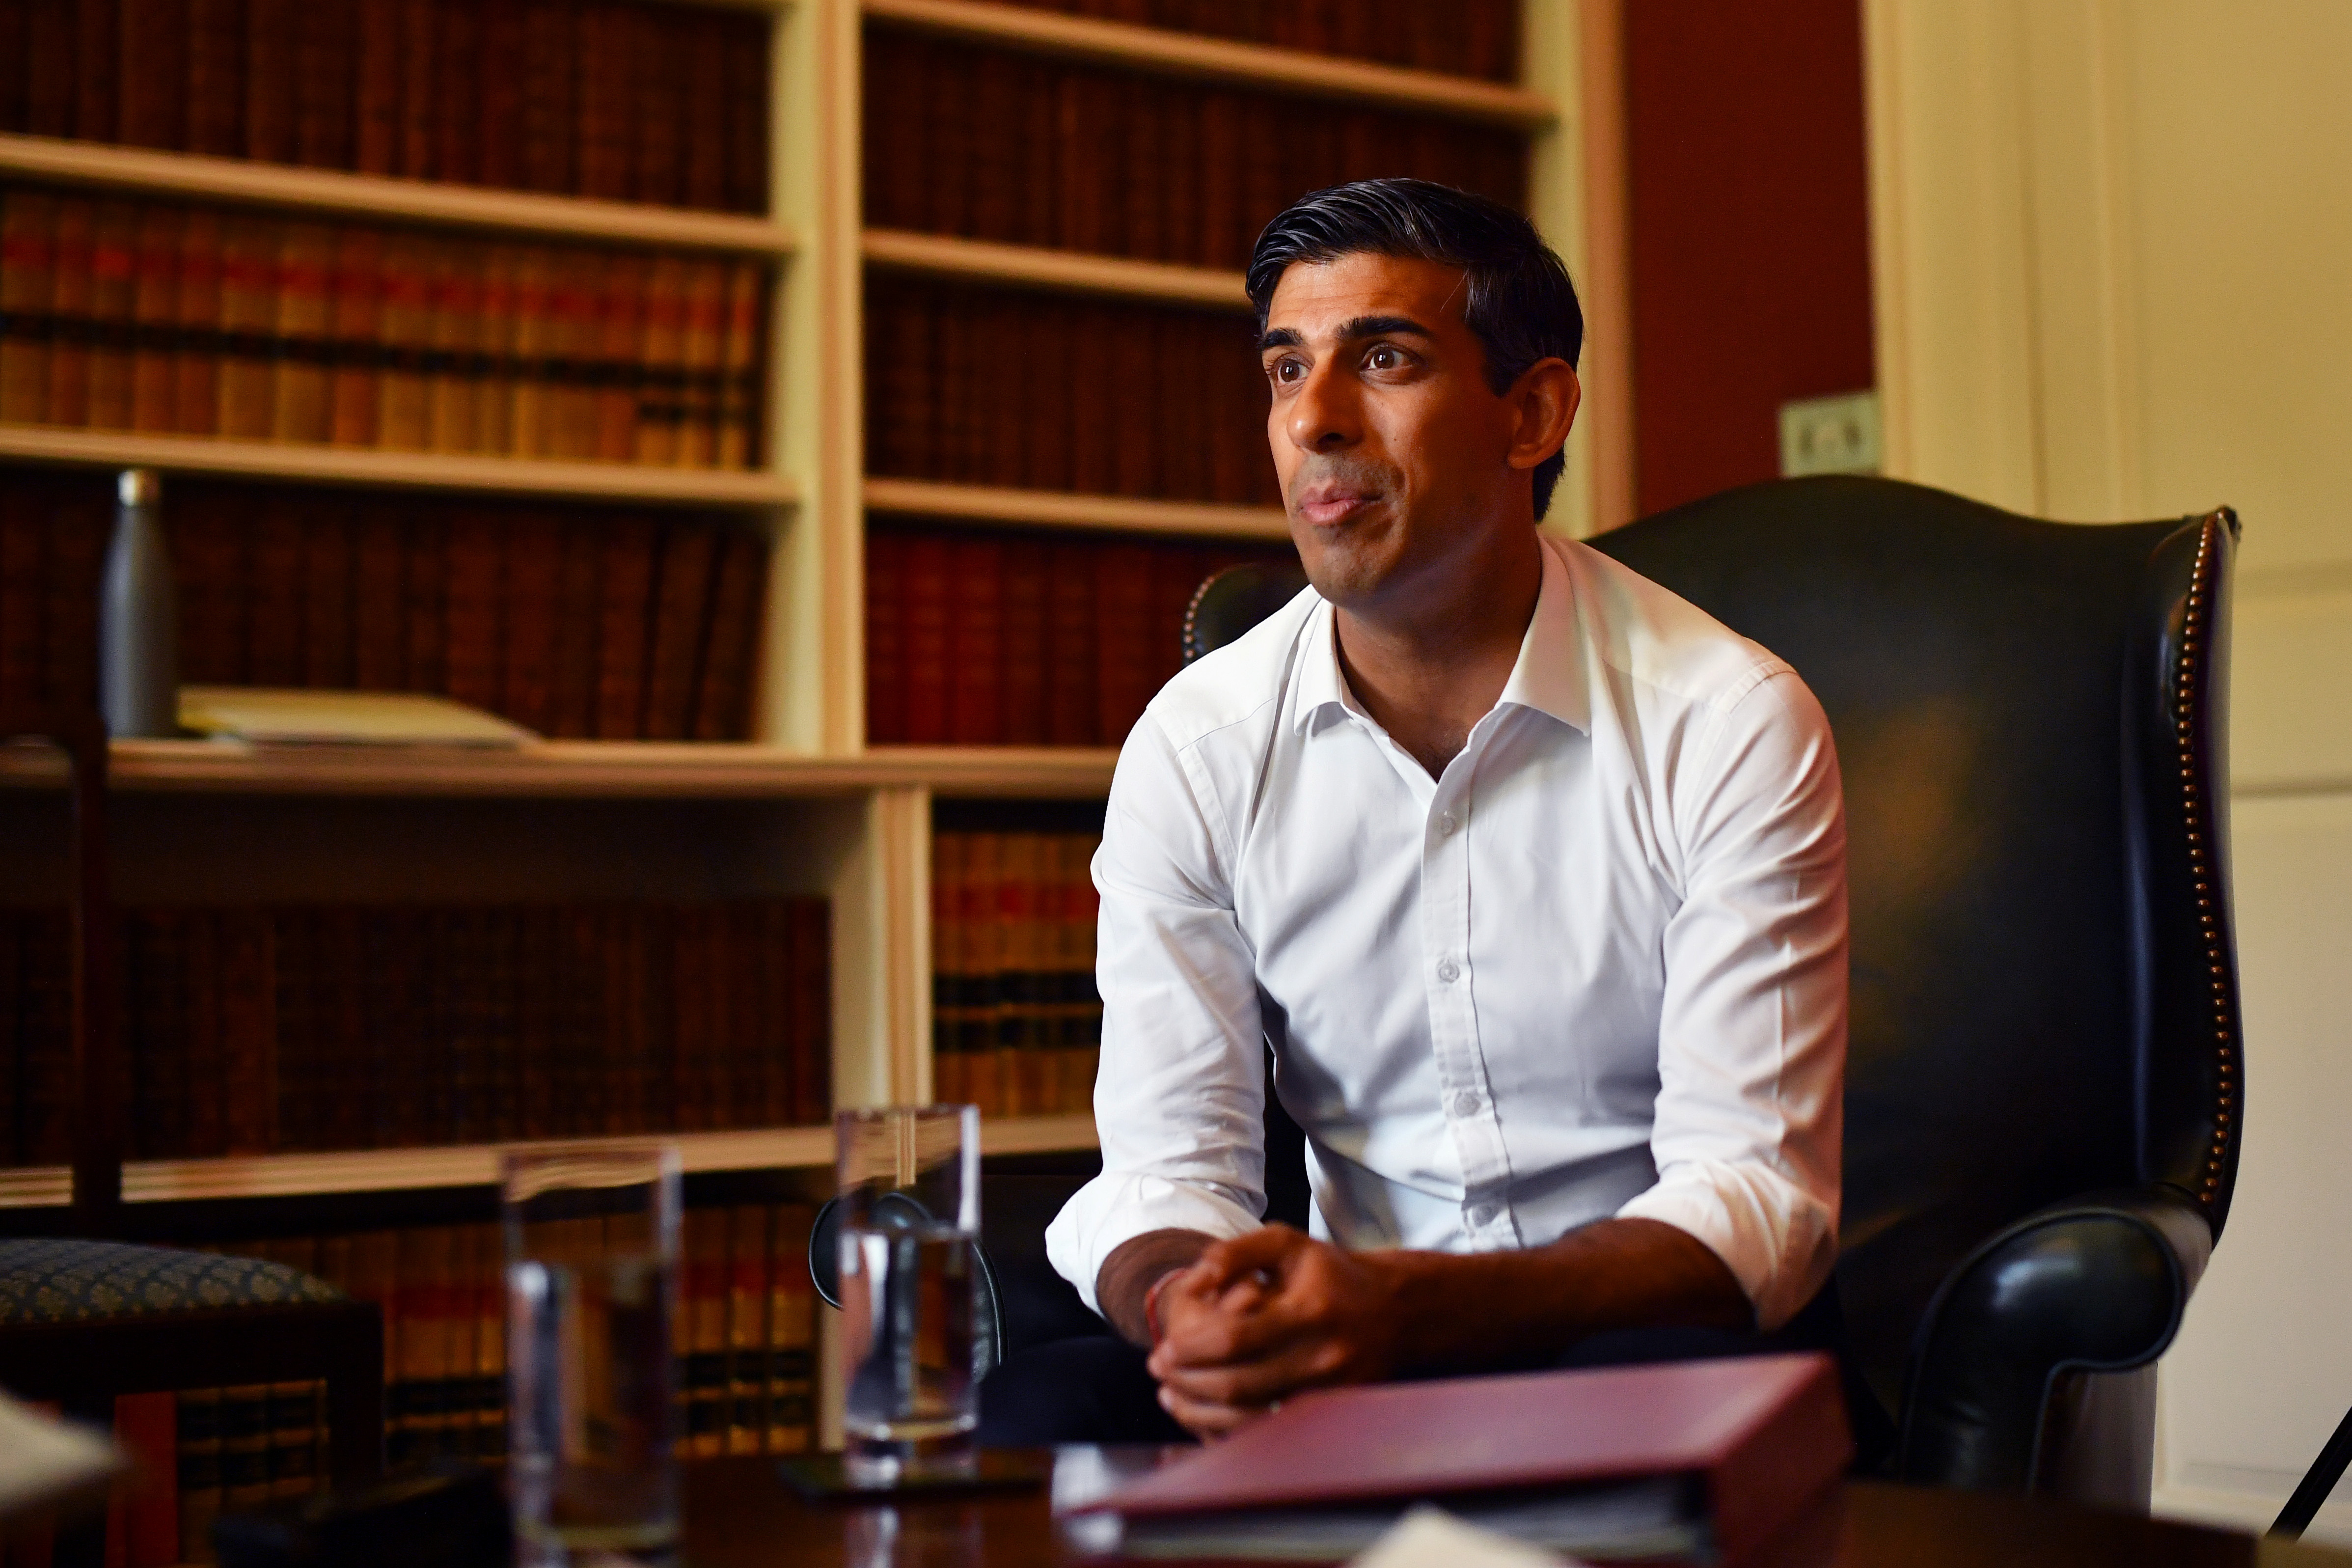 Britain's Chancellor of the Exchequer Rishi Sunak speaks during an interview in London